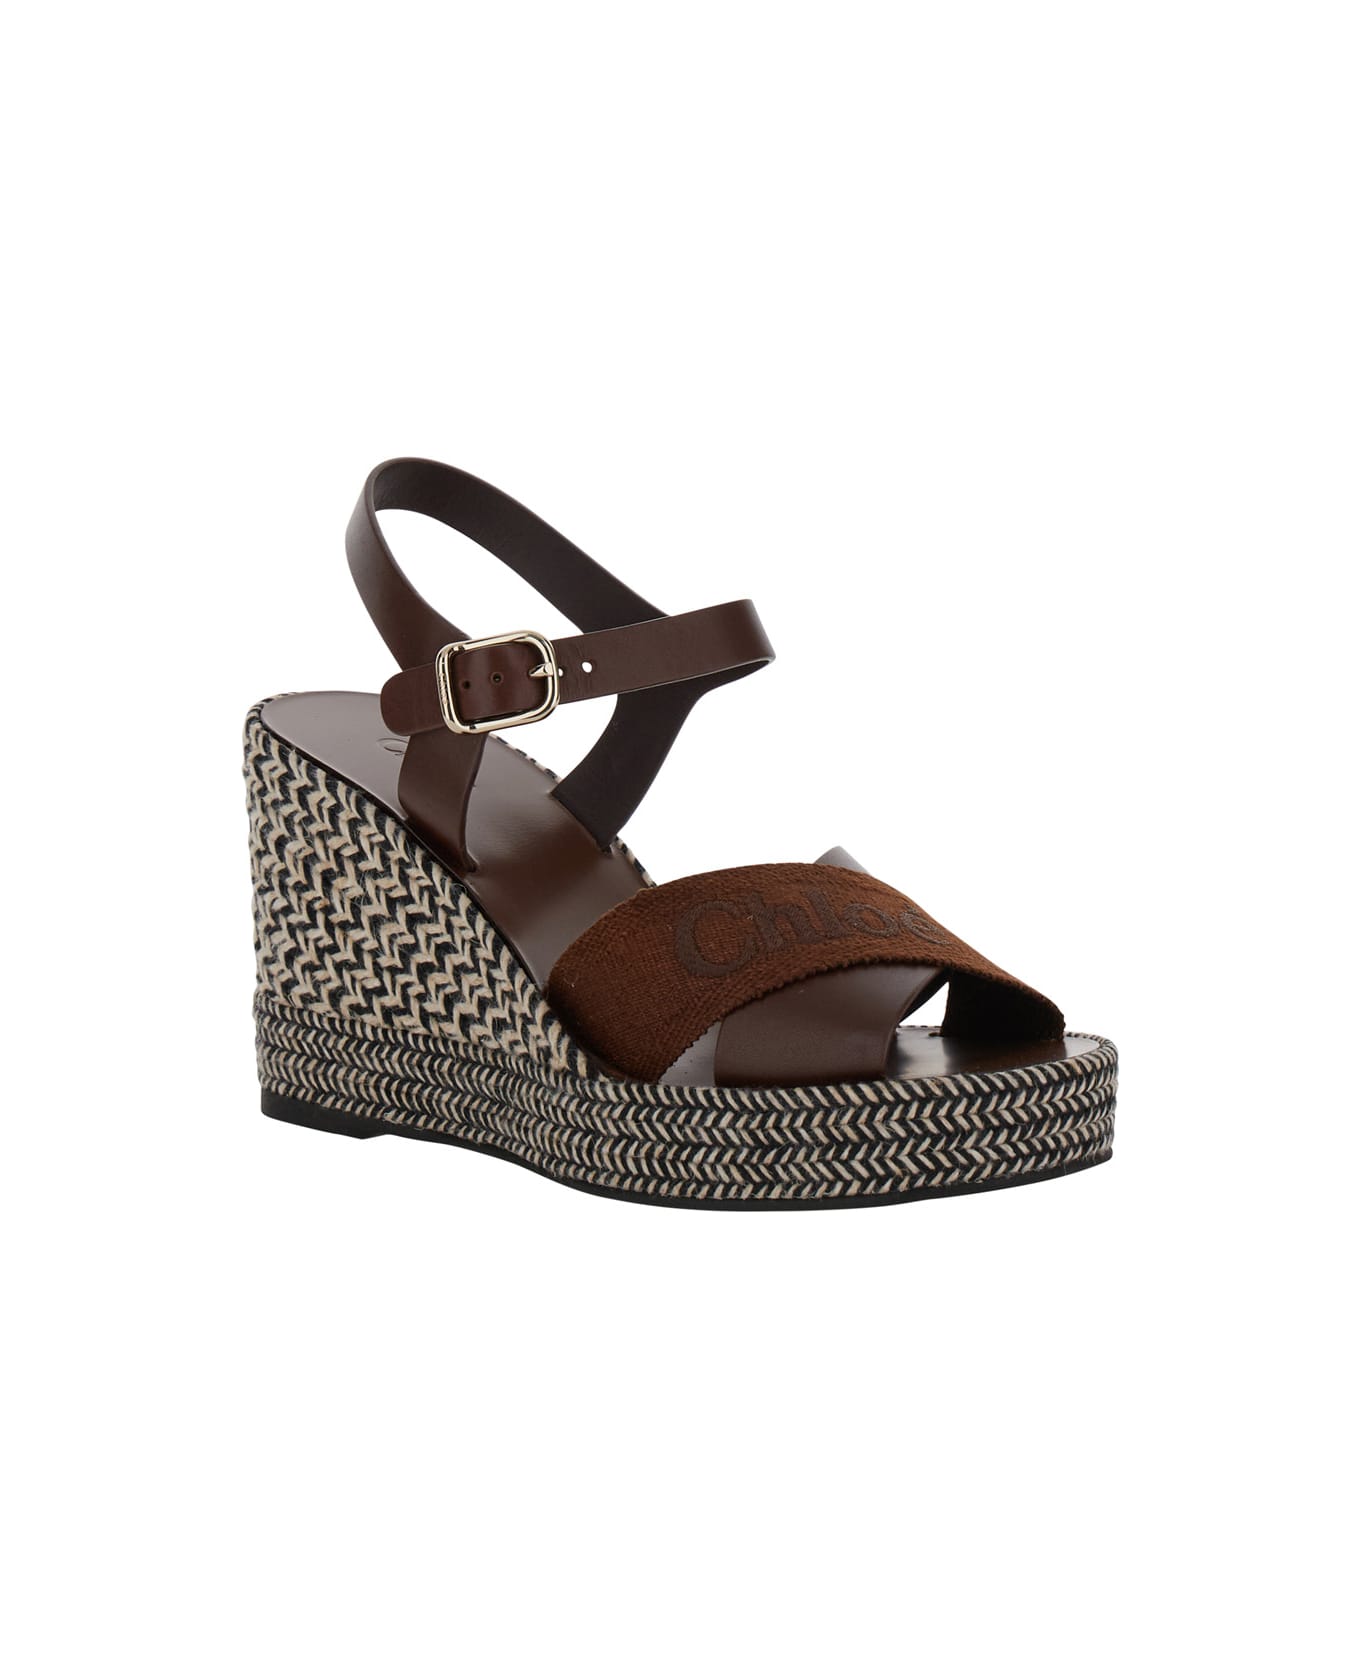 Chloé Espadrillas Sandals With Wedge In Leather And Jute - Brown サンダル